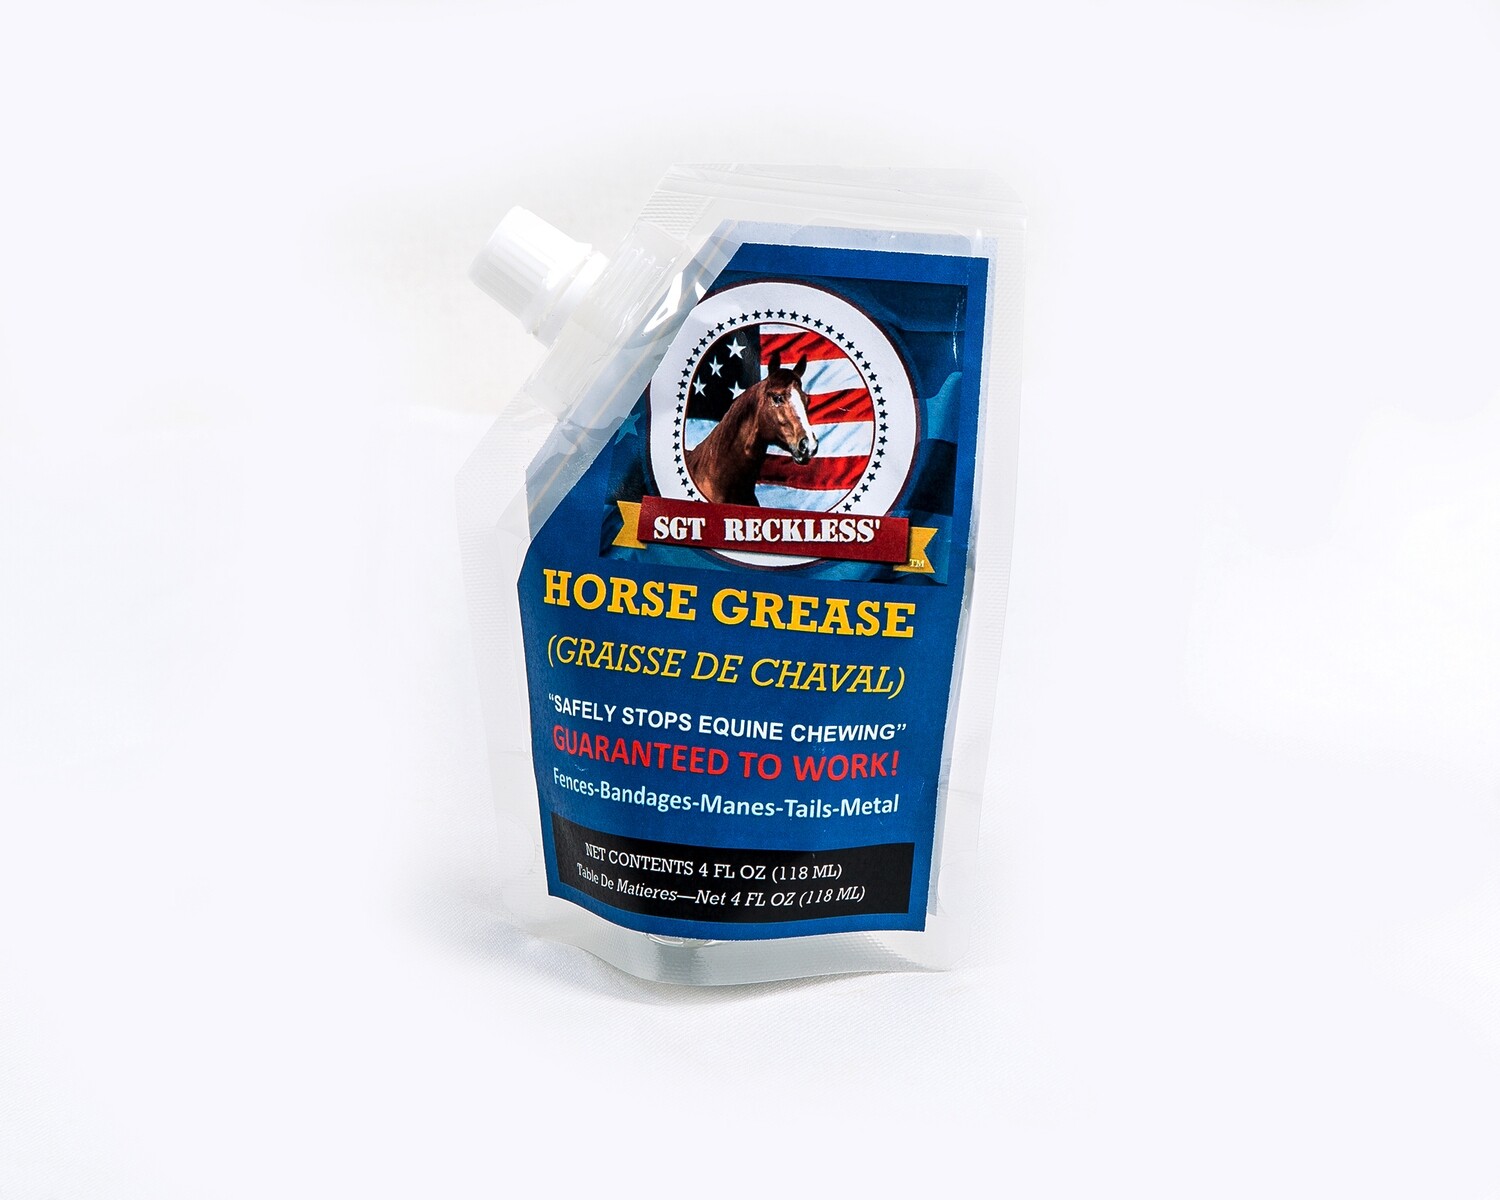 Sgt Reckless Horse Grease 4 oz